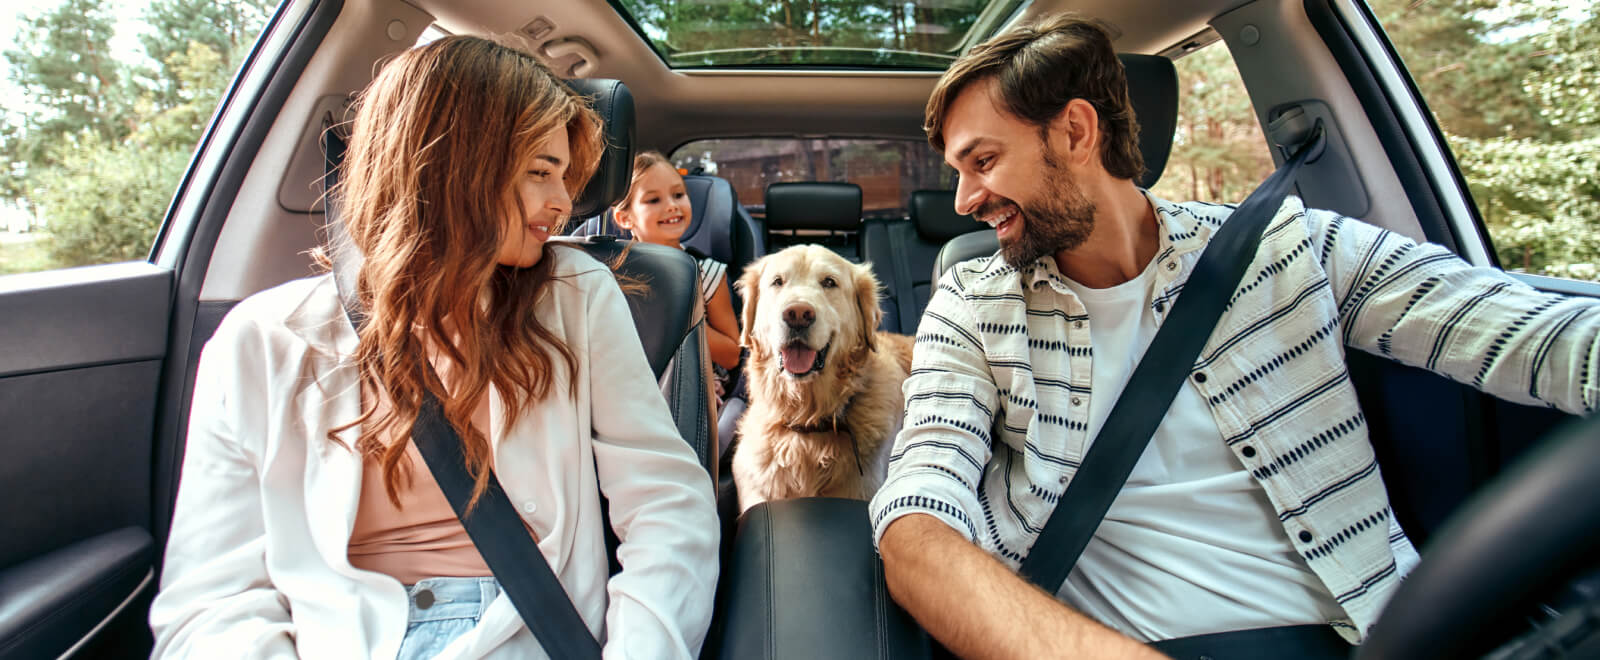 Young family and dog in the car for a road trip.